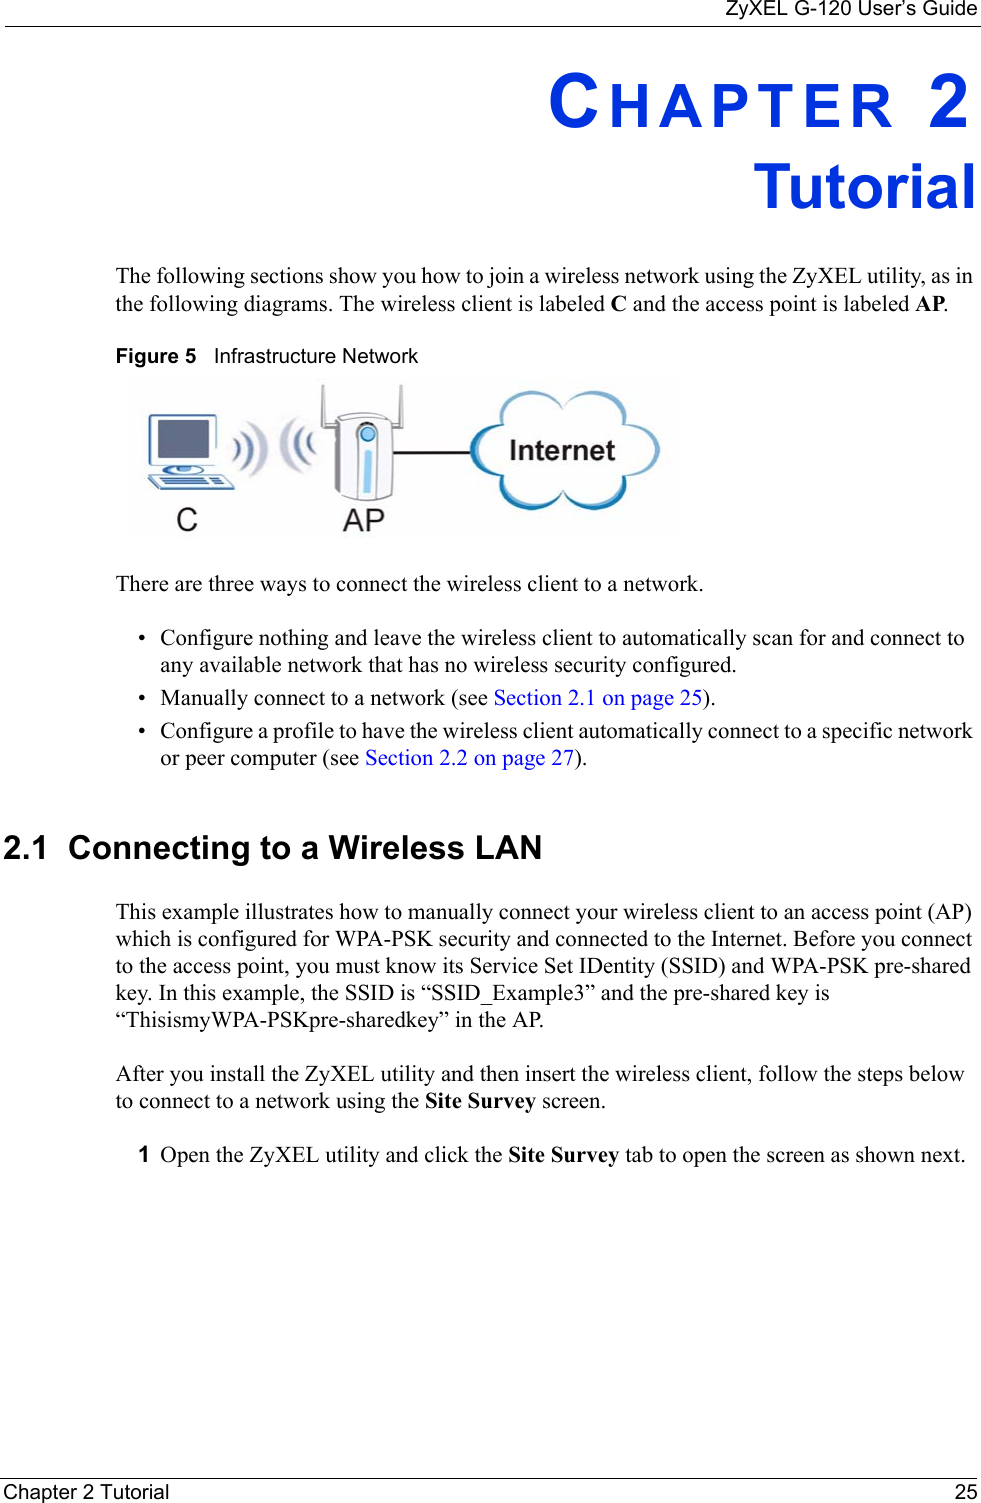 ZyXEL G-120 User’s GuideChapter 2 Tutorial 25CHAPTER 2TutorialThe following sections show you how to join a wireless network using the ZyXEL utility, as in the following diagrams. The wireless client is labeled C and the access point is labeled AP. Figure 5   Infrastructure NetworkThere are three ways to connect the wireless client to a network.• Configure nothing and leave the wireless client to automatically scan for and connect to any available network that has no wireless security configured.• Manually connect to a network (see Section 2.1 on page 25).• Configure a profile to have the wireless client automatically connect to a specific network or peer computer (see Section 2.2 on page 27). 2.1  Connecting to a Wireless LAN This example illustrates how to manually connect your wireless client to an access point (AP) which is configured for WPA-PSK security and connected to the Internet. Before you connect to the access point, you must know its Service Set IDentity (SSID) and WPA-PSK pre-shared key. In this example, the SSID is “SSID_Example3” and the pre-shared key is “ThisismyWPA-PSKpre-sharedkey” in the AP. After you install the ZyXEL utility and then insert the wireless client, follow the steps below to connect to a network using the Site Survey screen. 1Open the ZyXEL utility and click the Site Survey tab to open the screen as shown next.